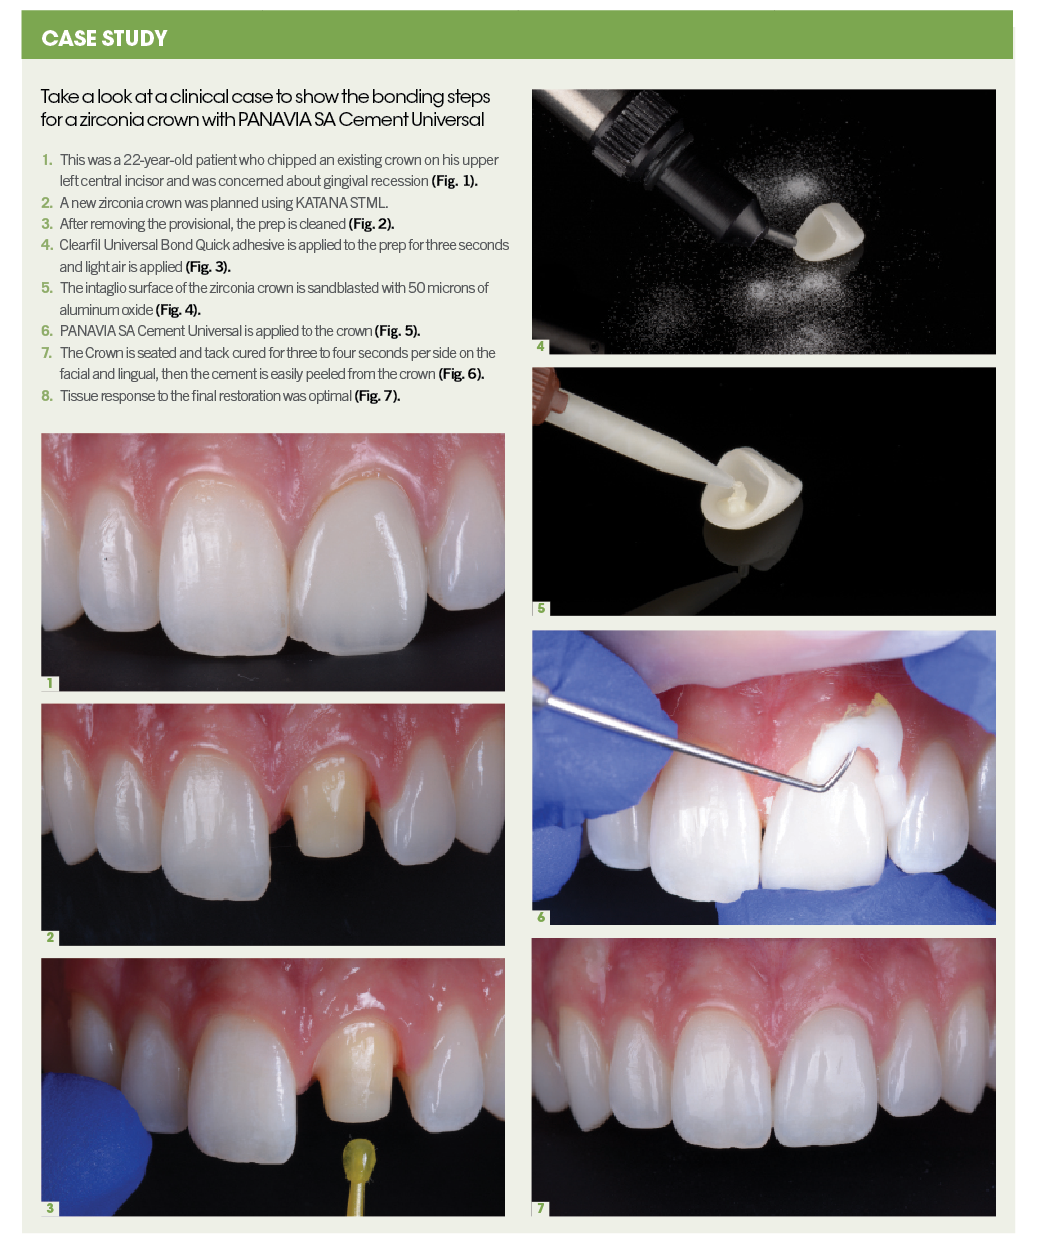 Case Study and clinical images courtesy of Sergio Arias, DDS, MS, Prosthodontist.